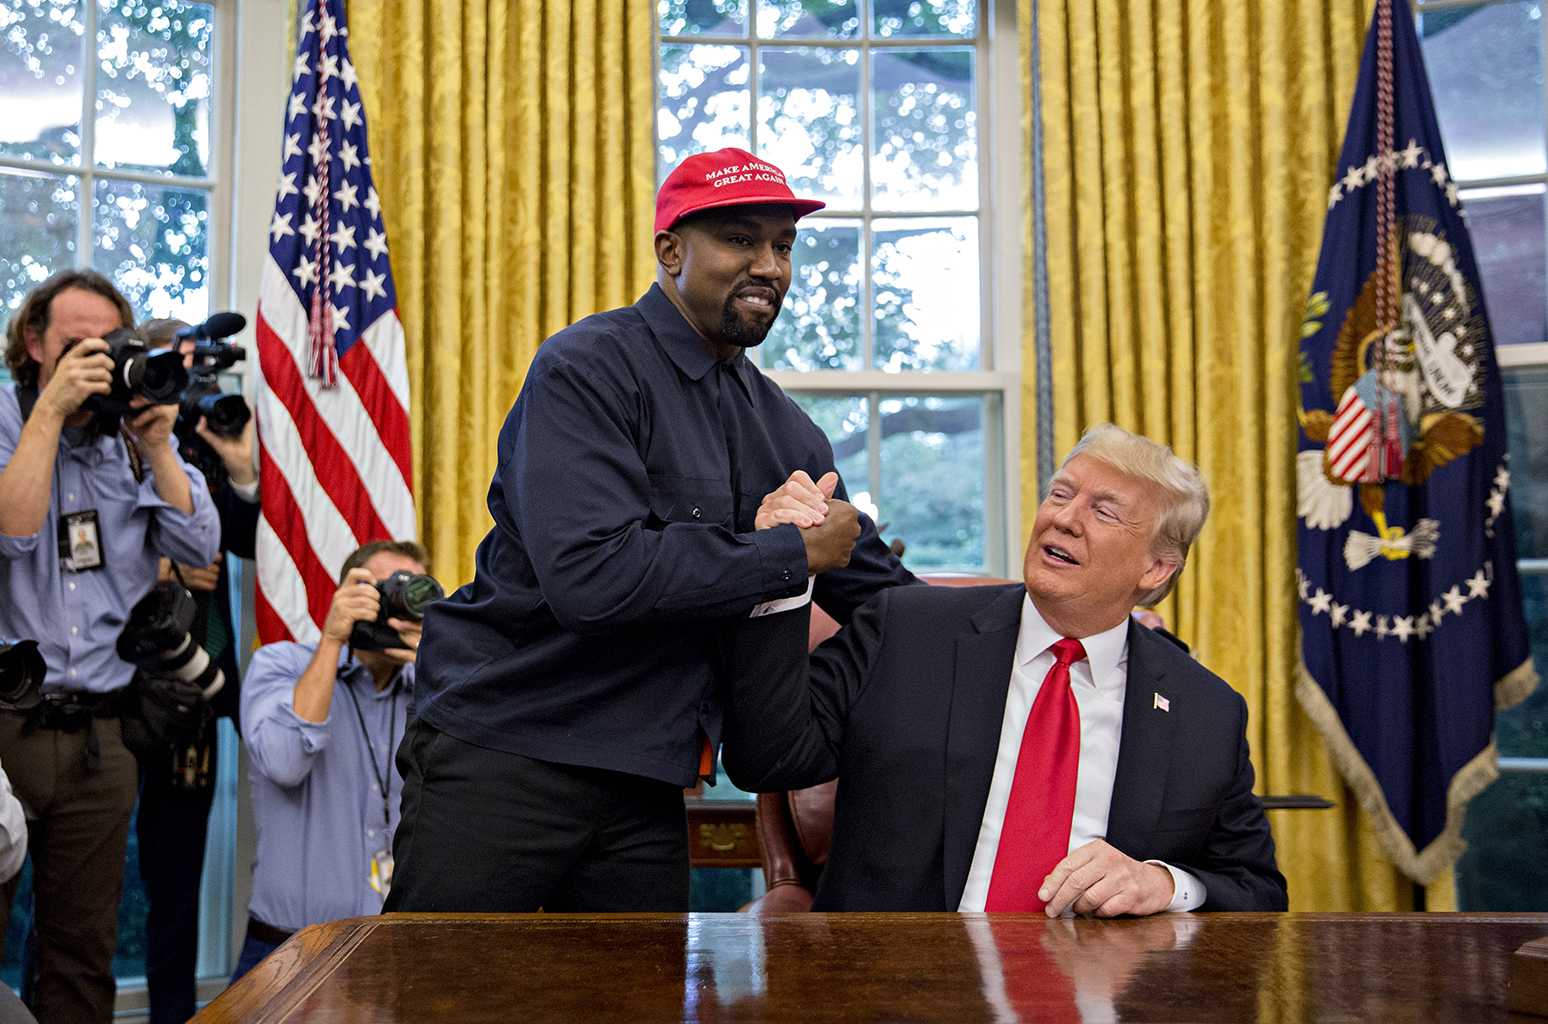 Kanye West with Donald Trump at White House (Source: Billboard)